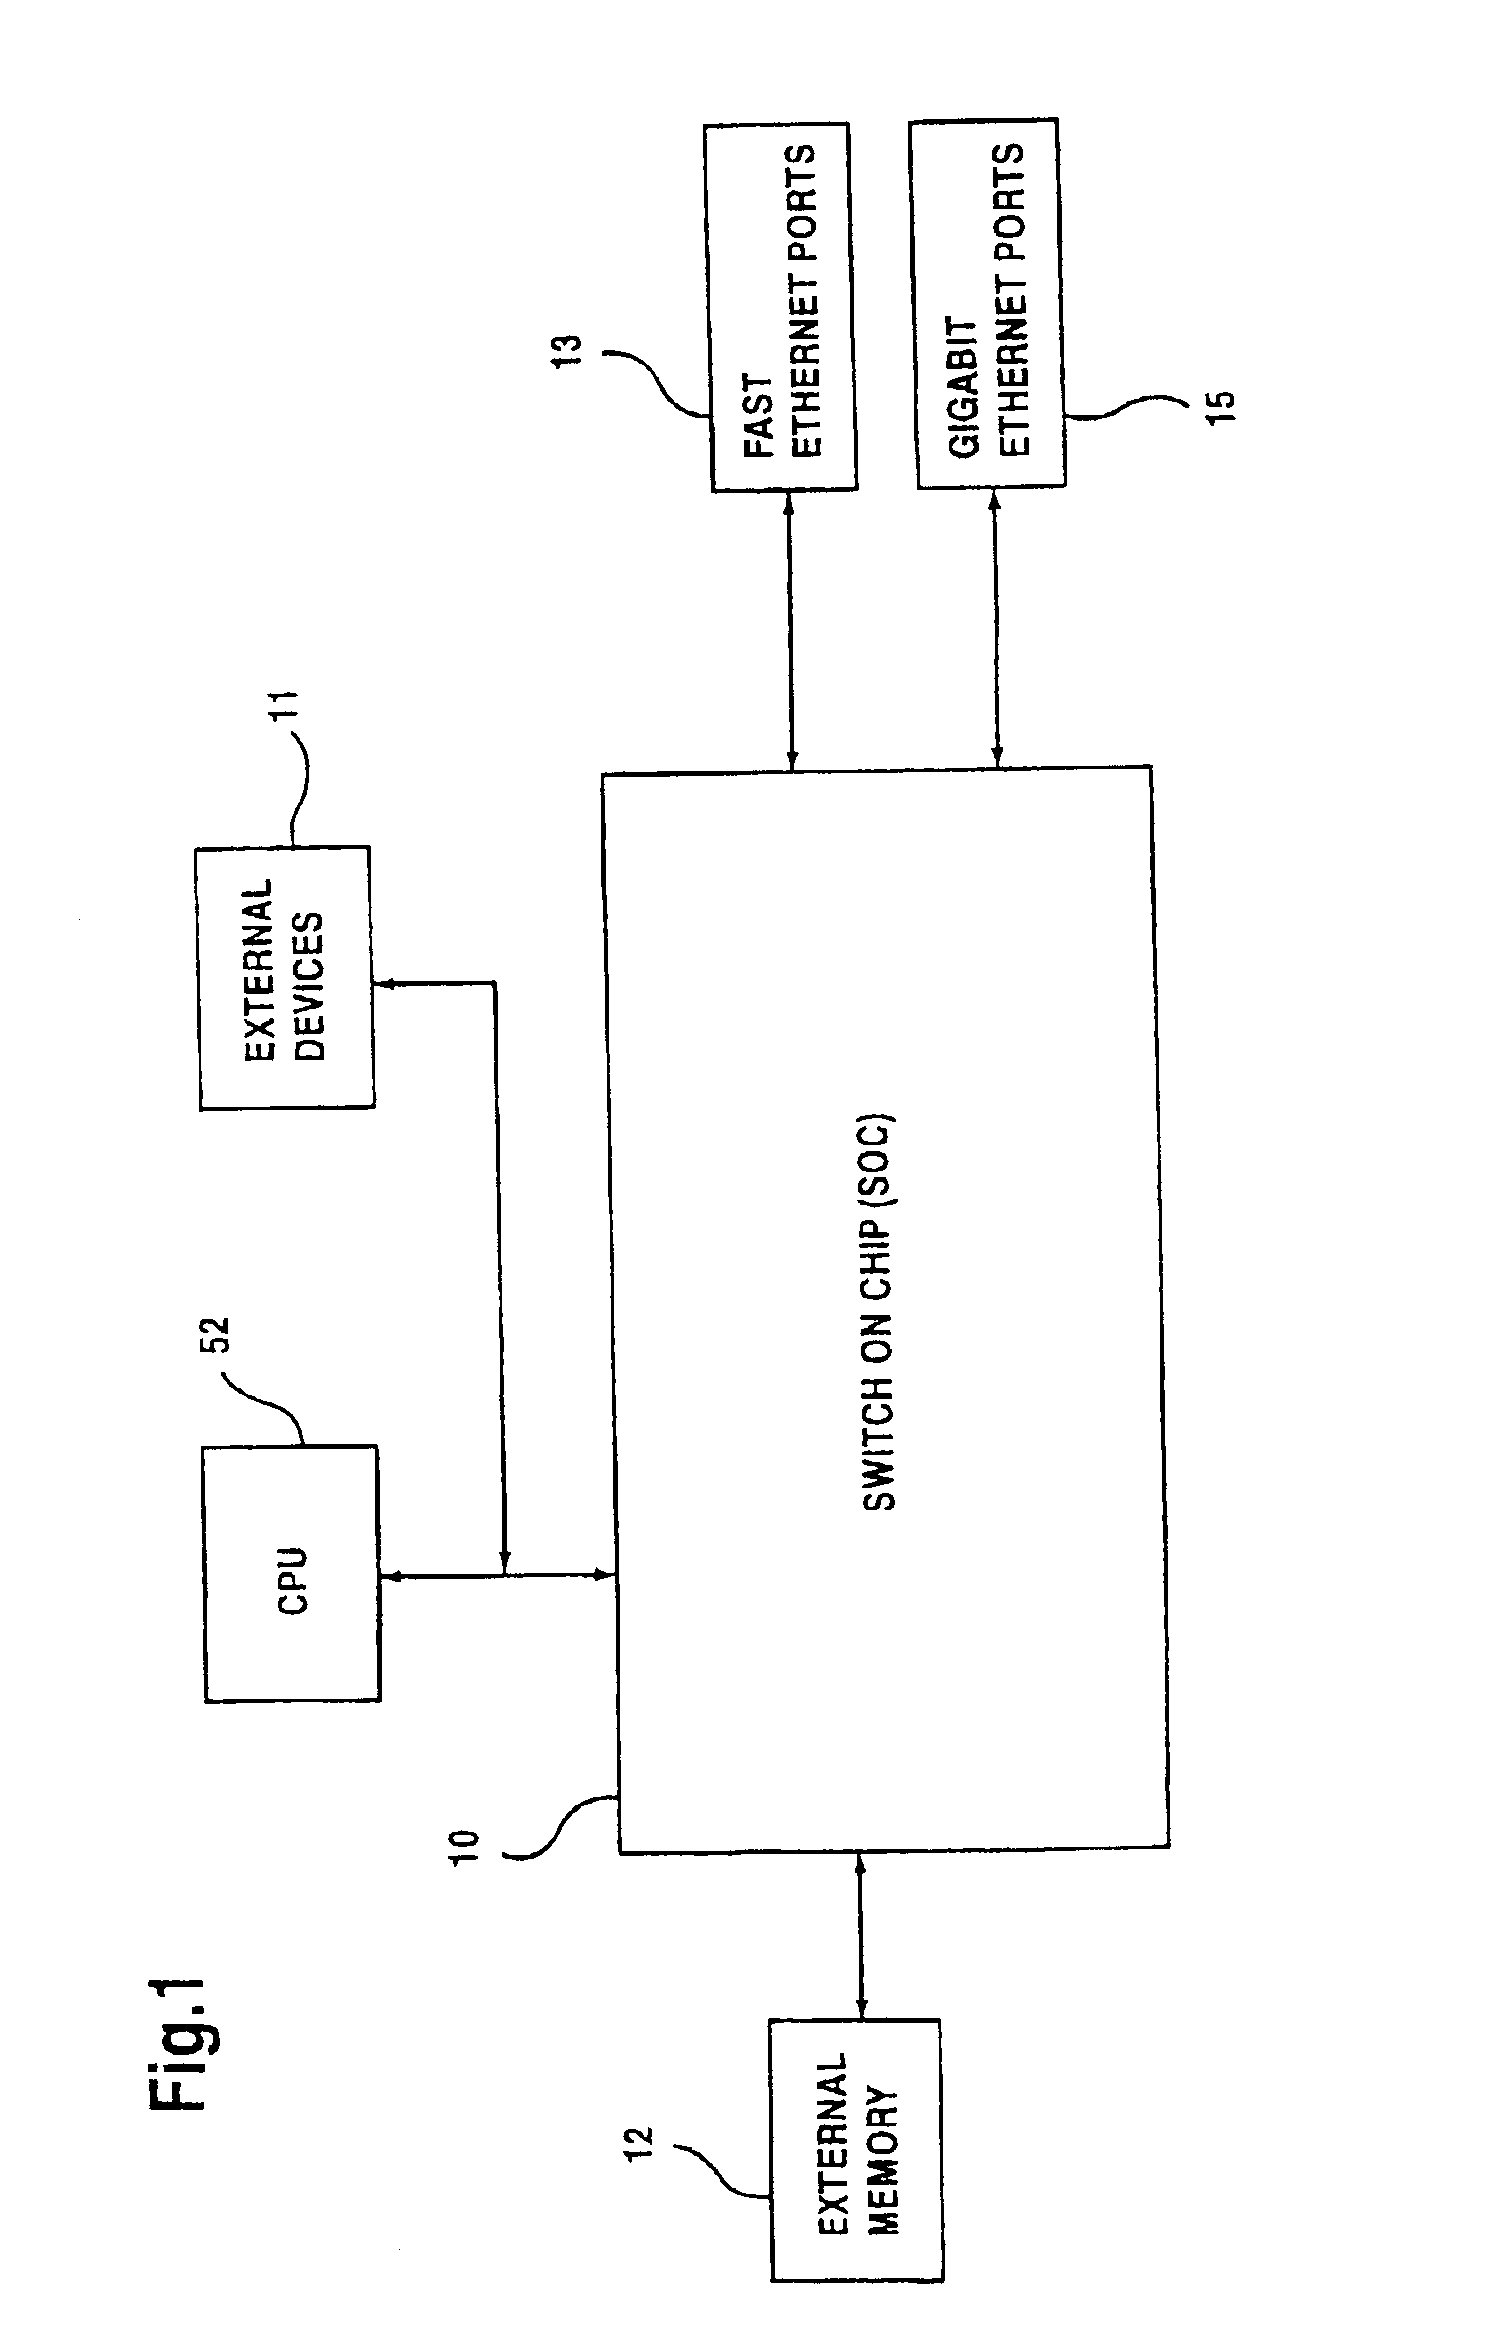 Fast flexible filter processor based architecture for a network device